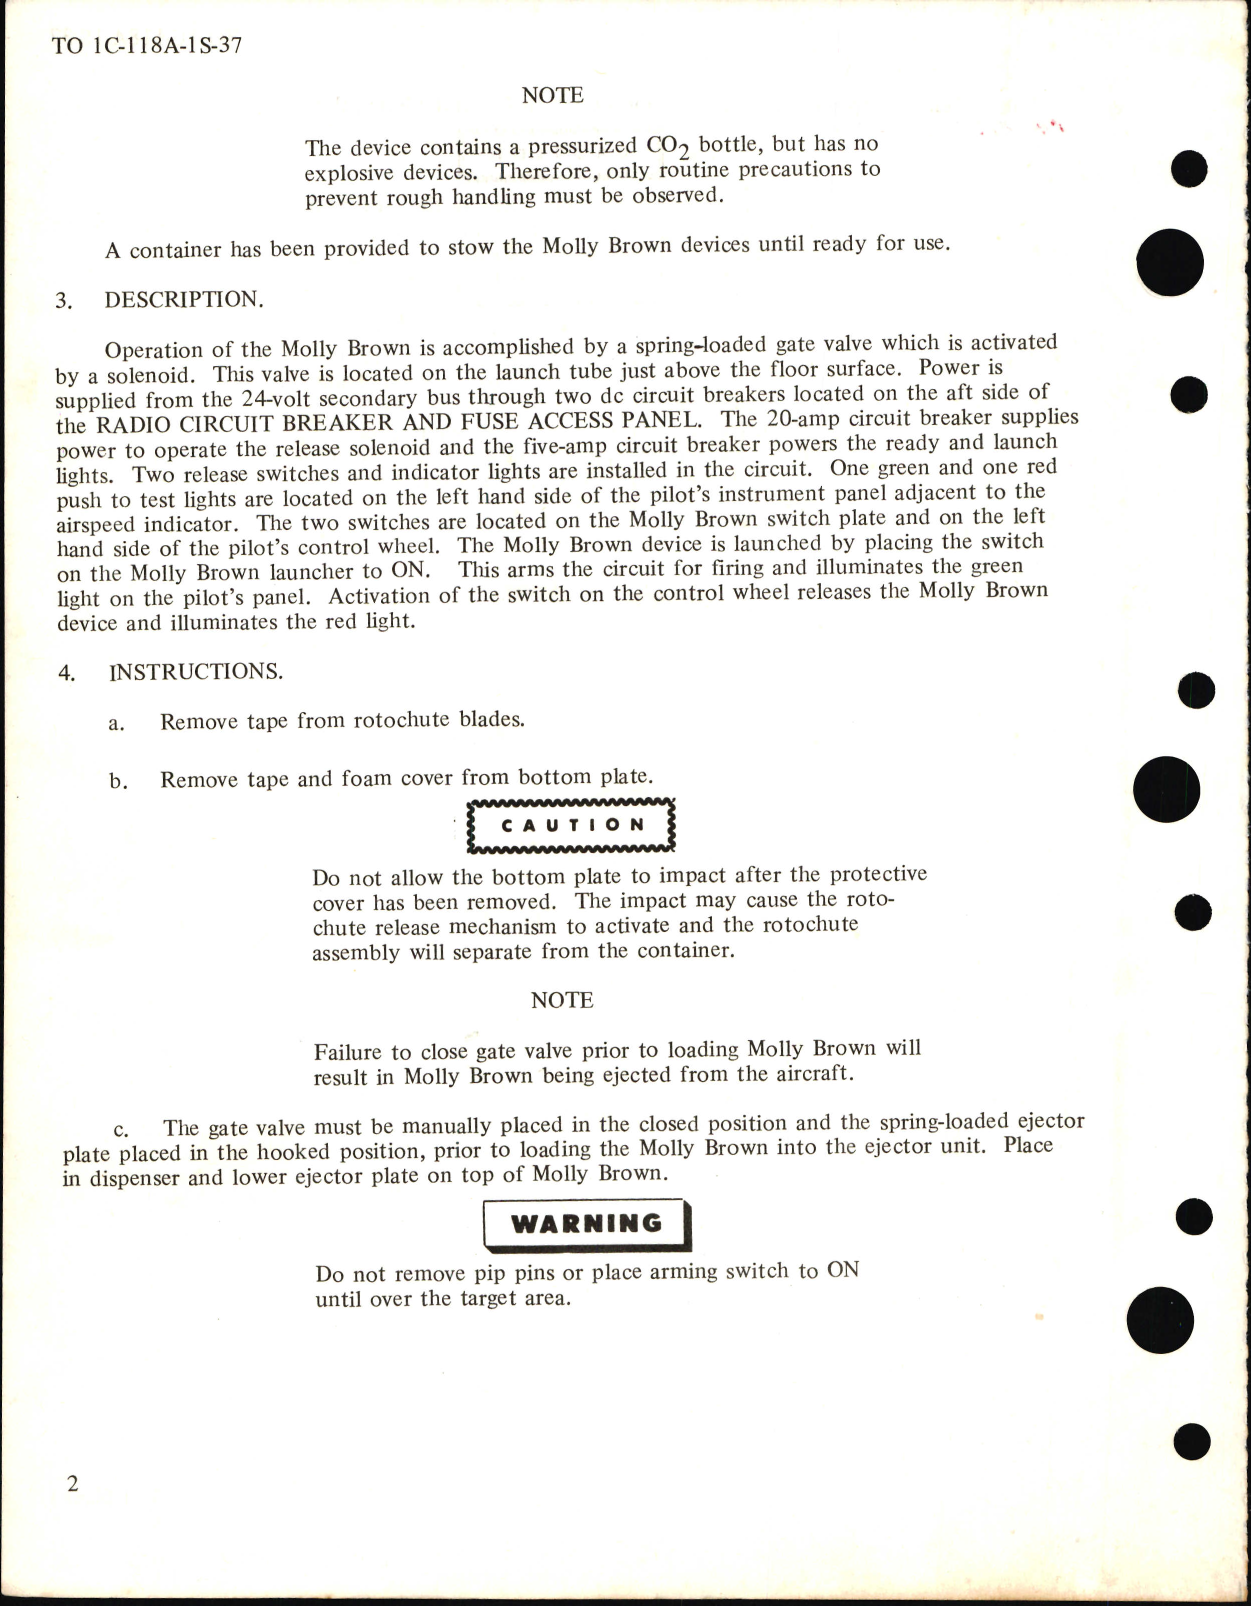 Sample page 6 from AirCorps Library document: Flight Manual for C-118A and VC-118A